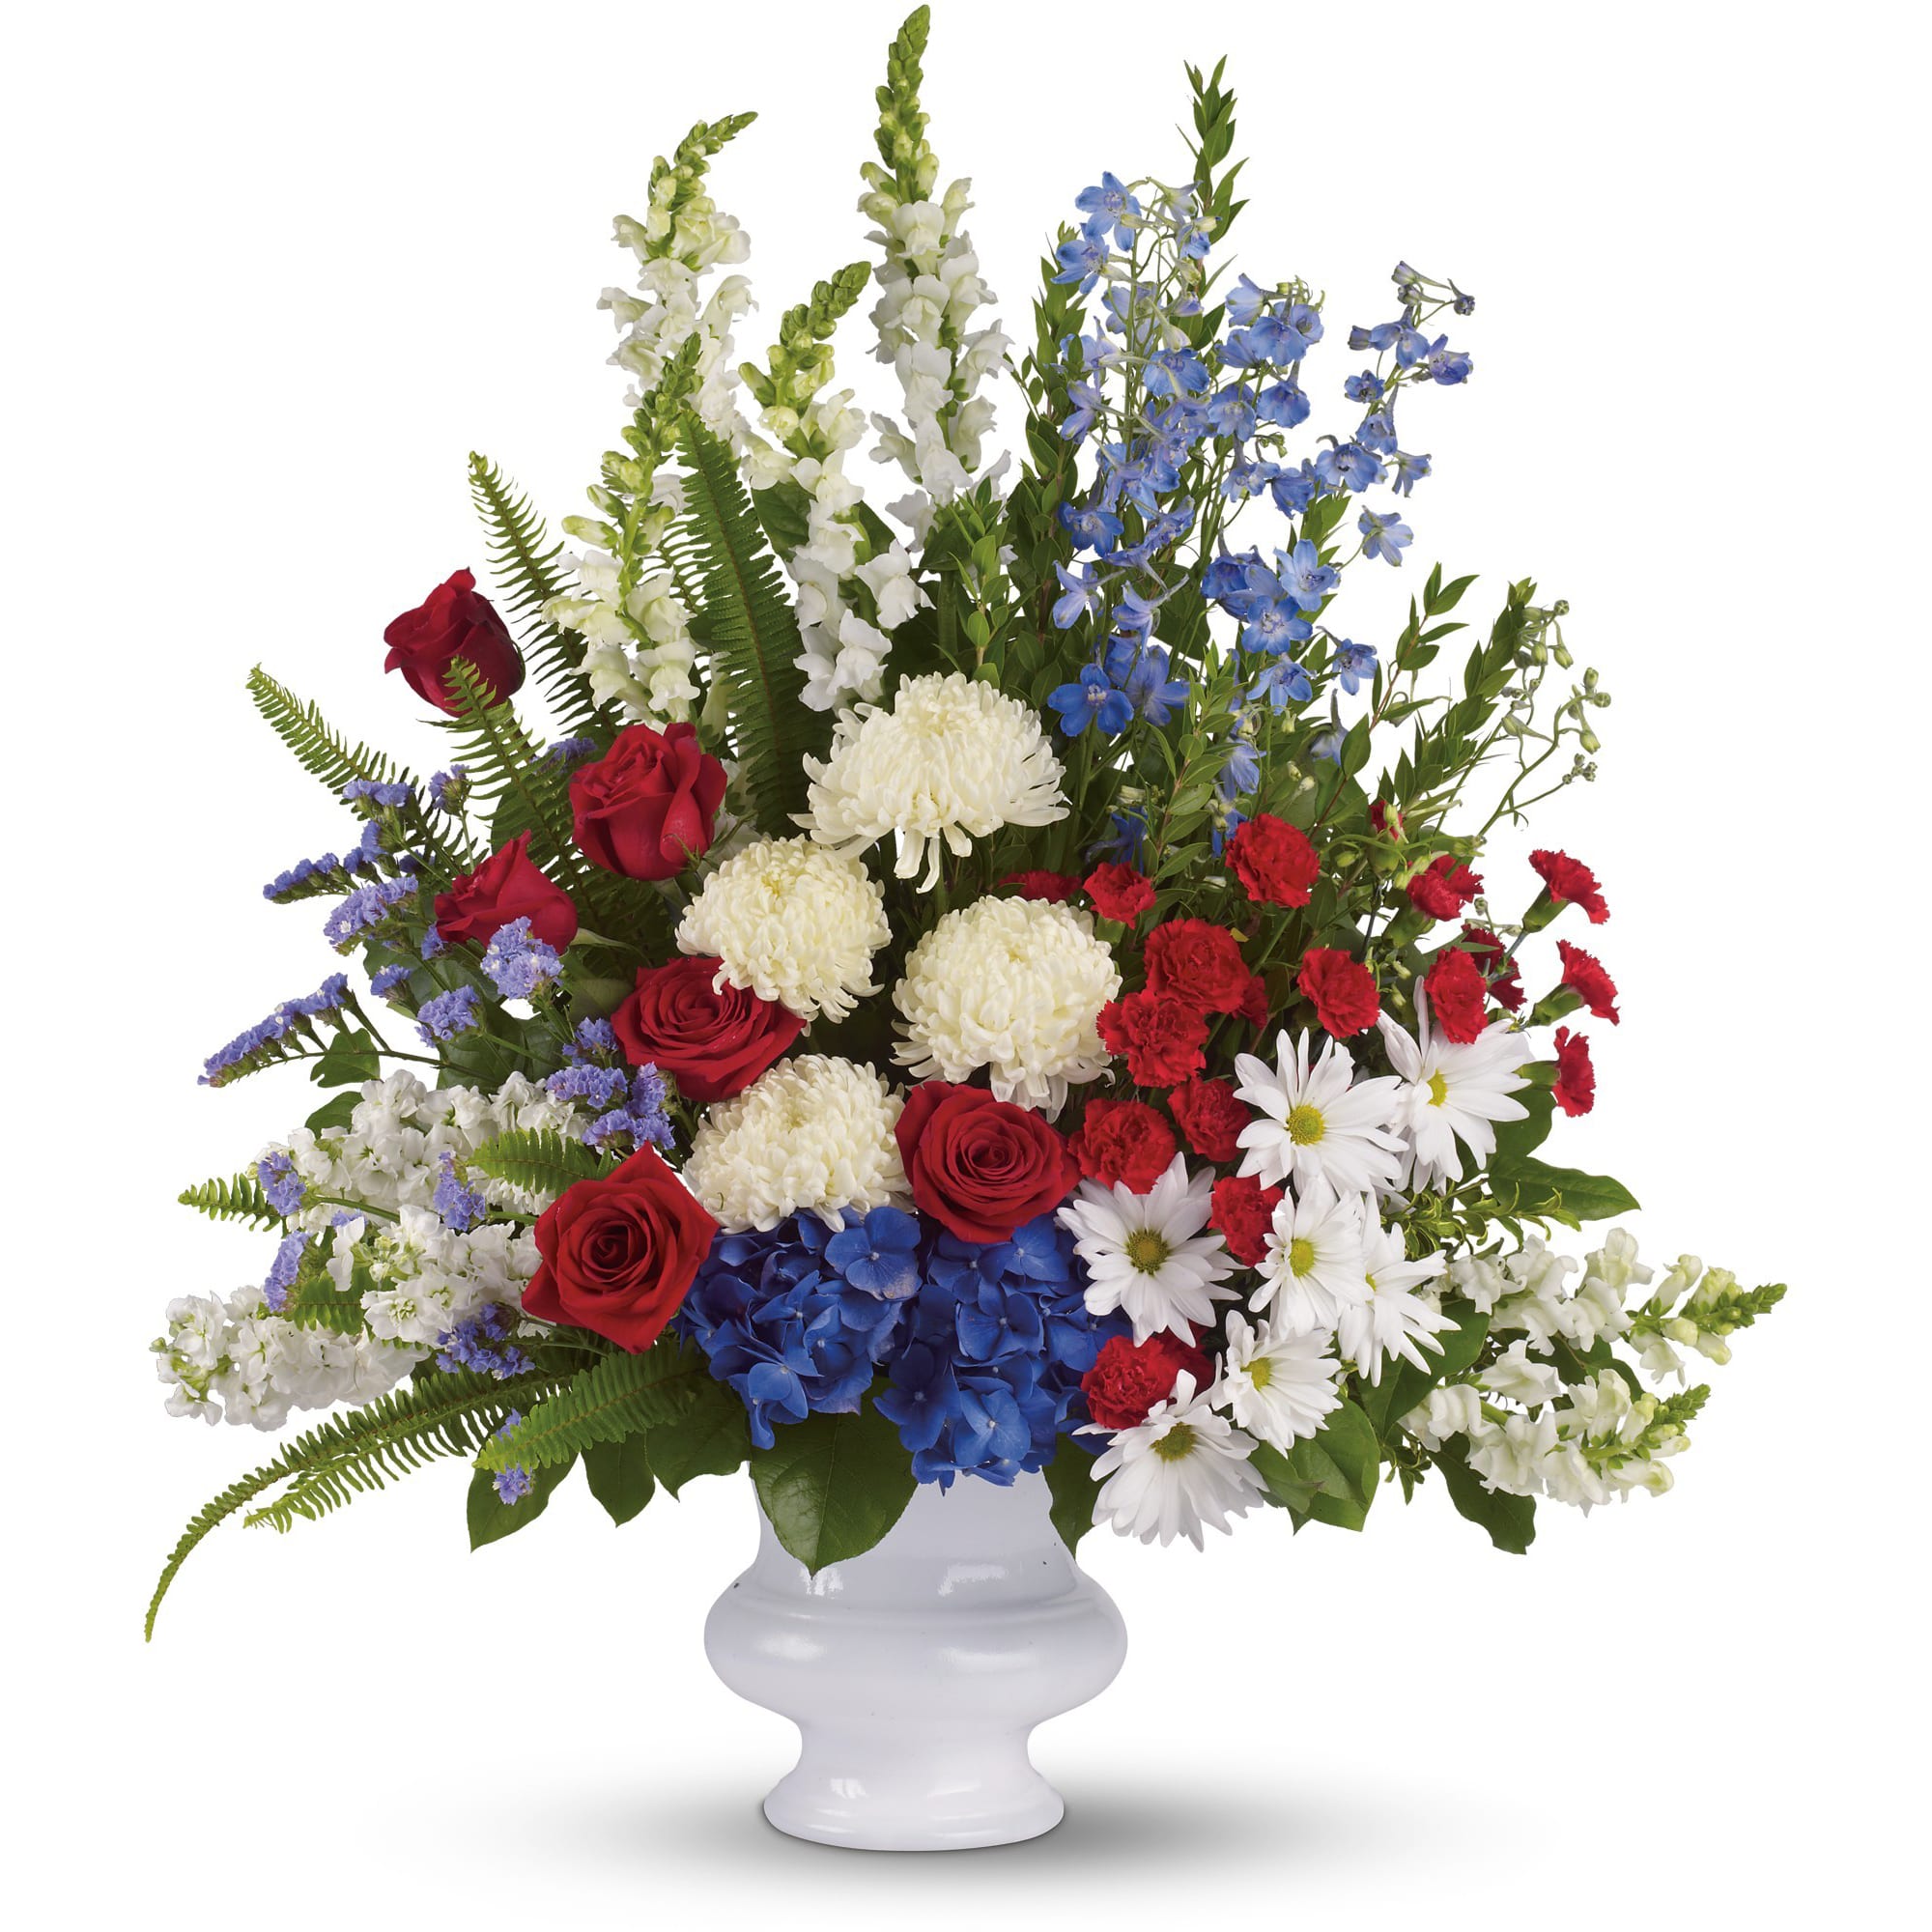 With Distinction by Teleflora T240-1A - A dazzling display of patriotic red, white and blue flowers sends a silent yet poignant statement about hope, freedom and the strength to endure. This proud bouquet is a testament to life that is sure to be appreciated. T240-1A 